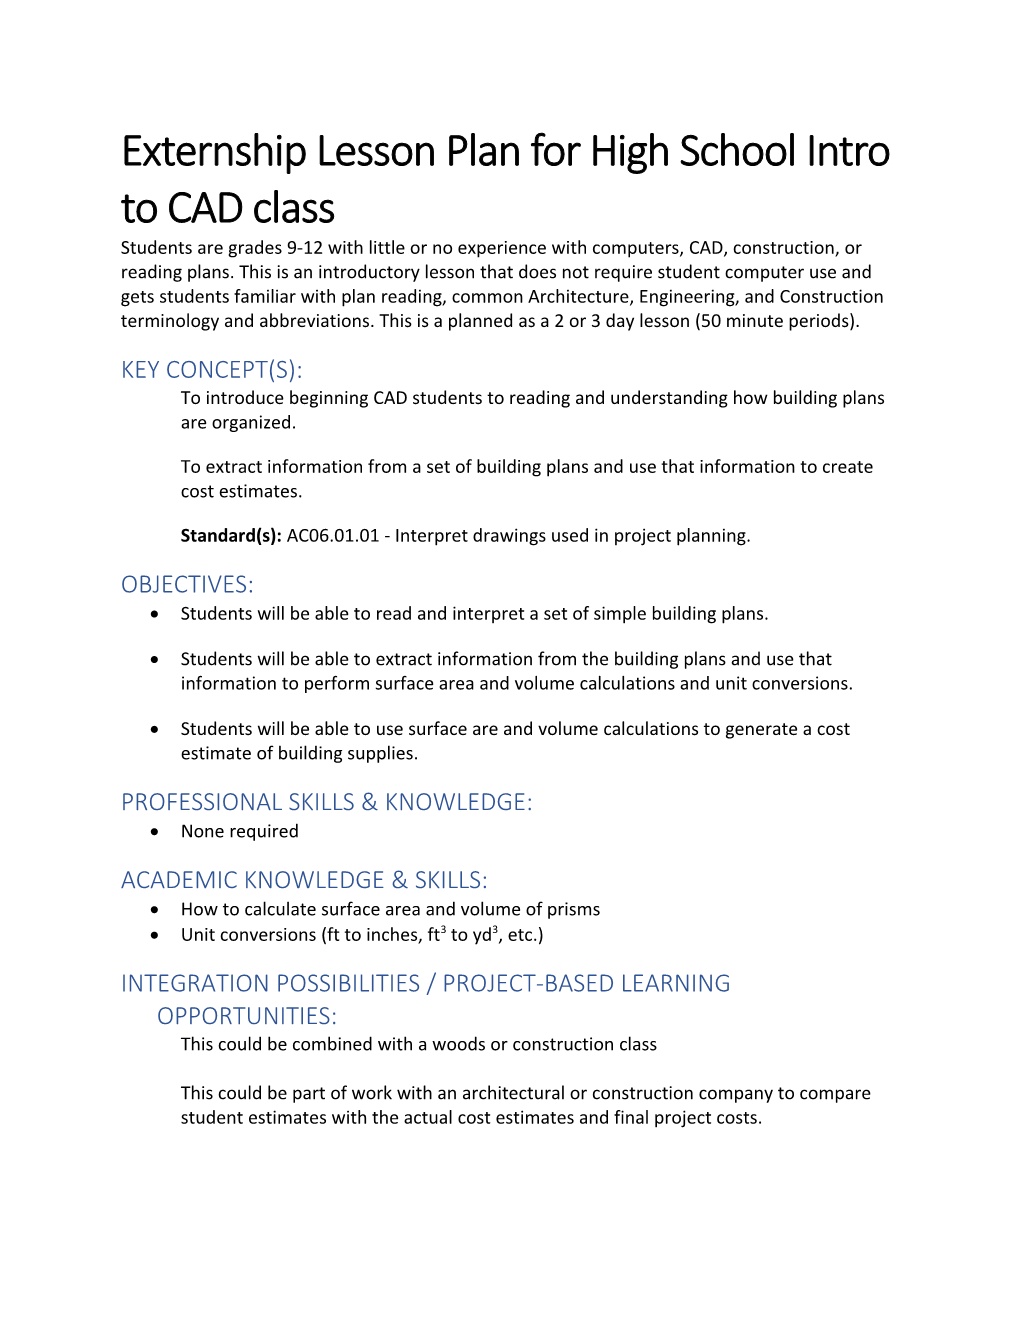 Externship Lesson Plan for High School Intro to CAD Class